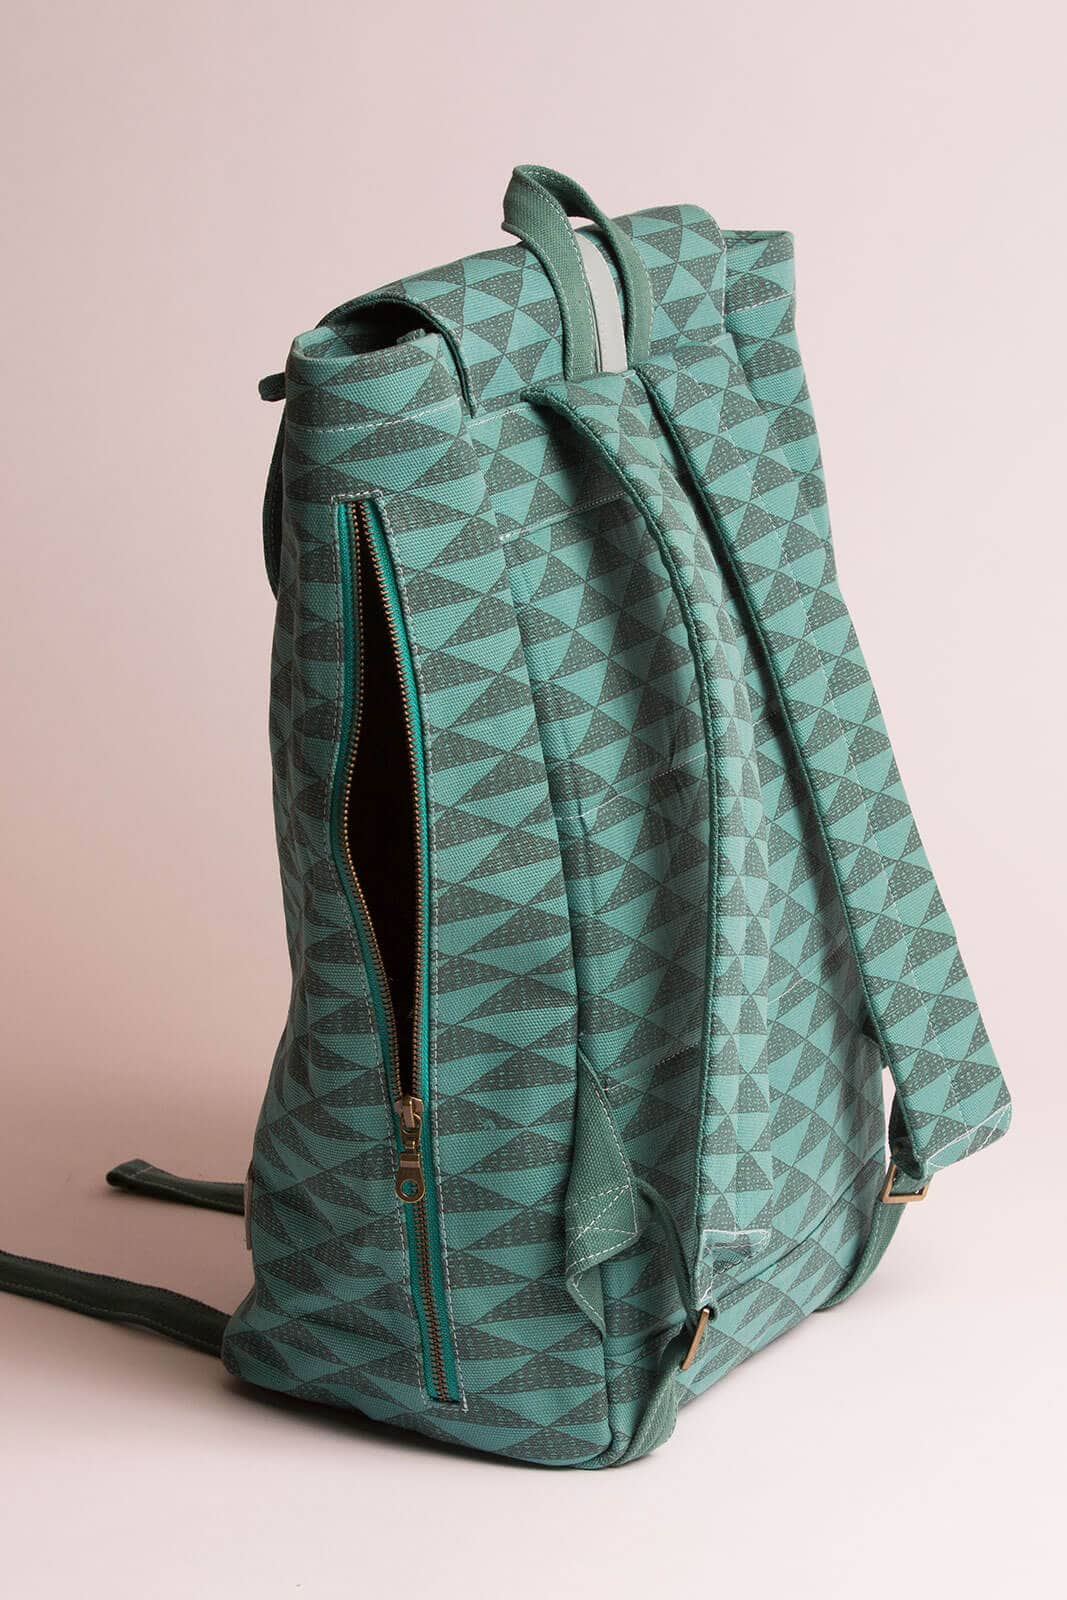 Manaola Backpack in Green and Teal